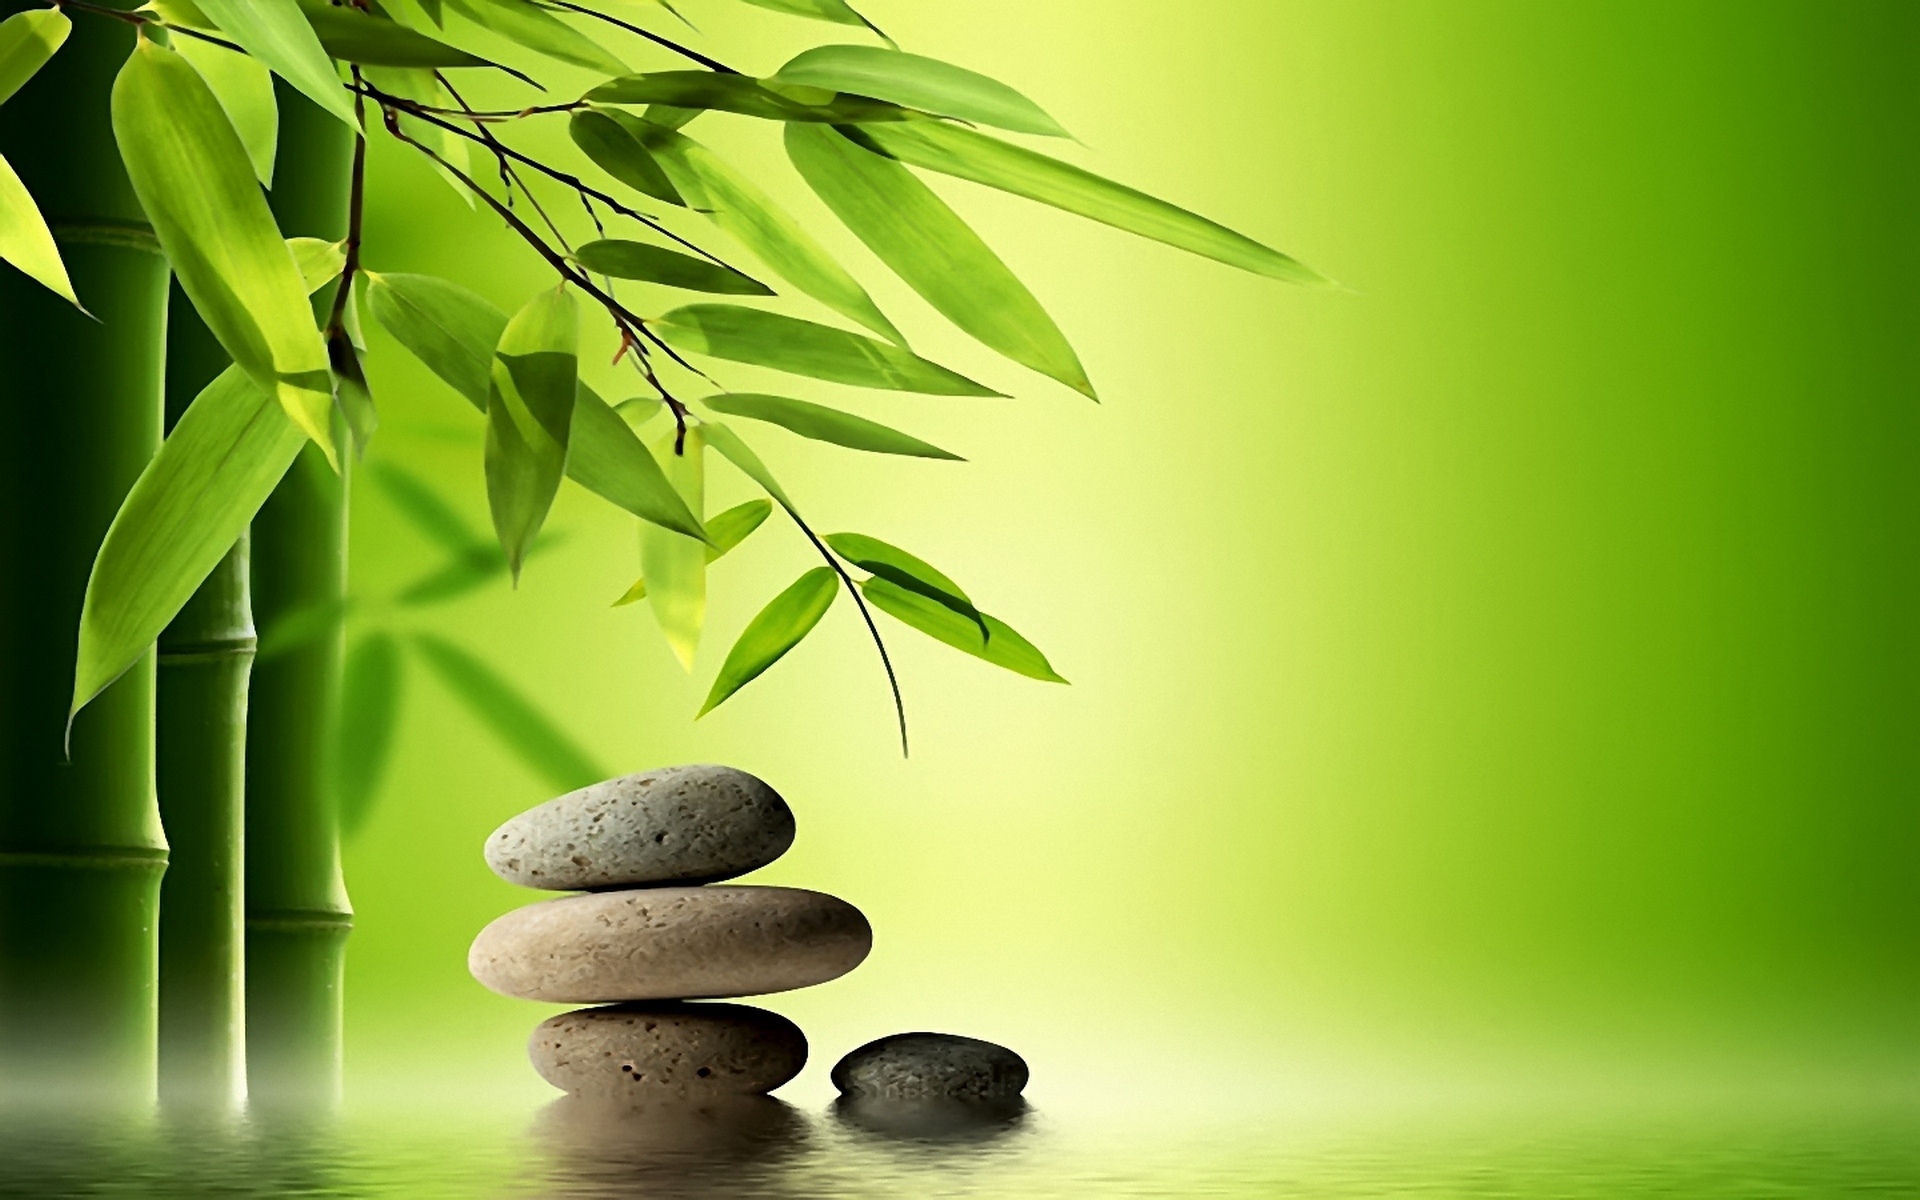 Desktop Wallpaper Zen To For Your Mobile Puter And